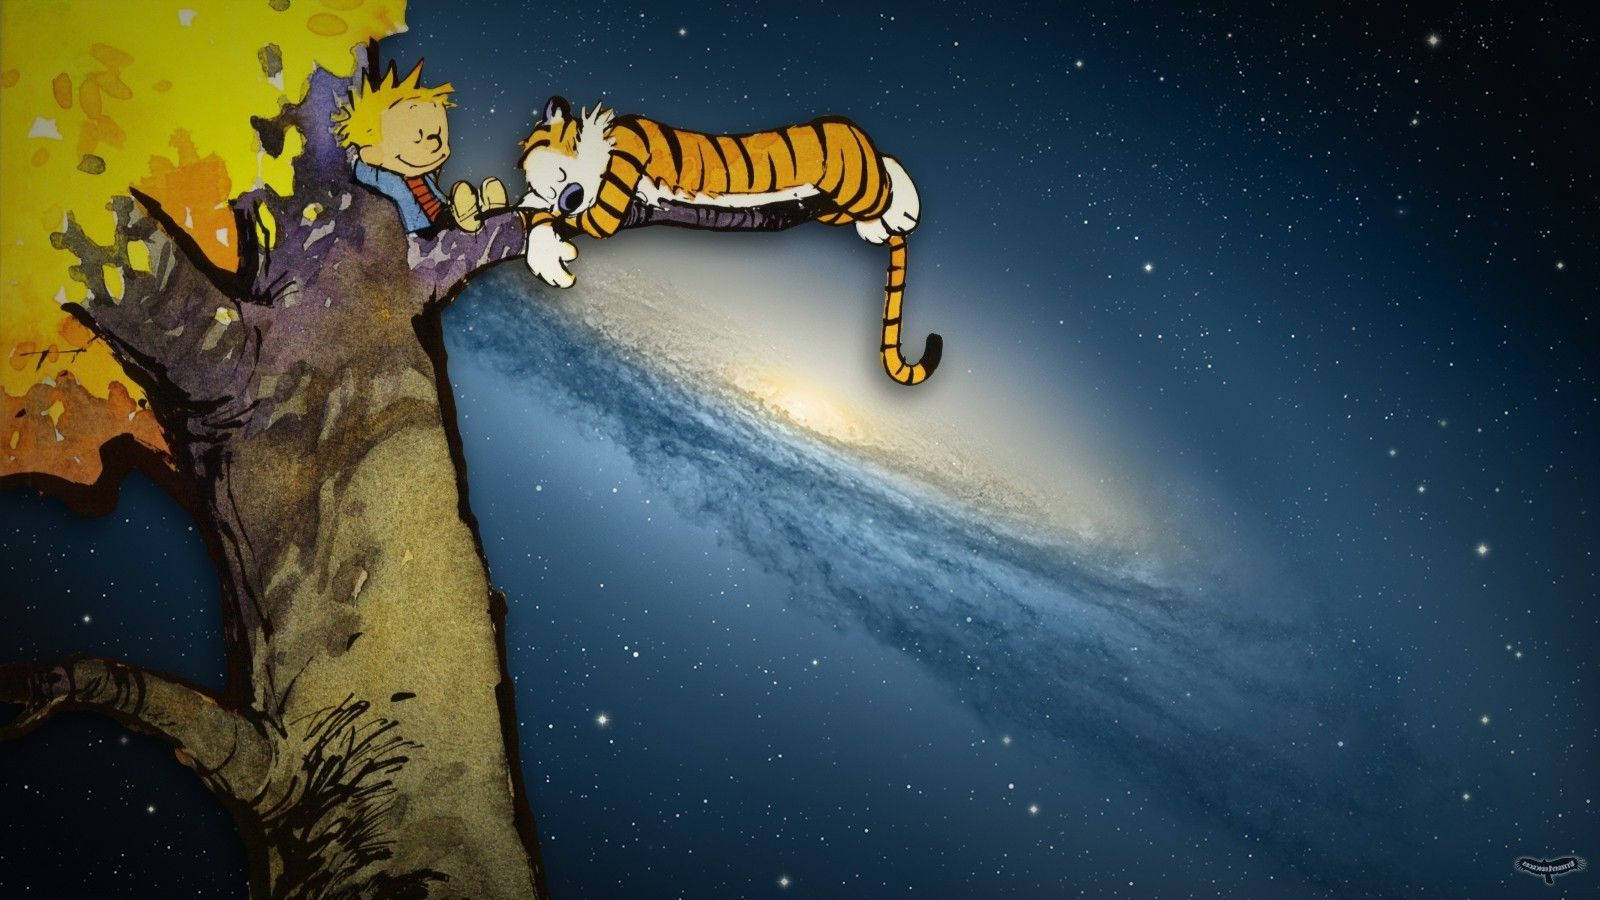 Calvin And Hobbes In The Tree Background